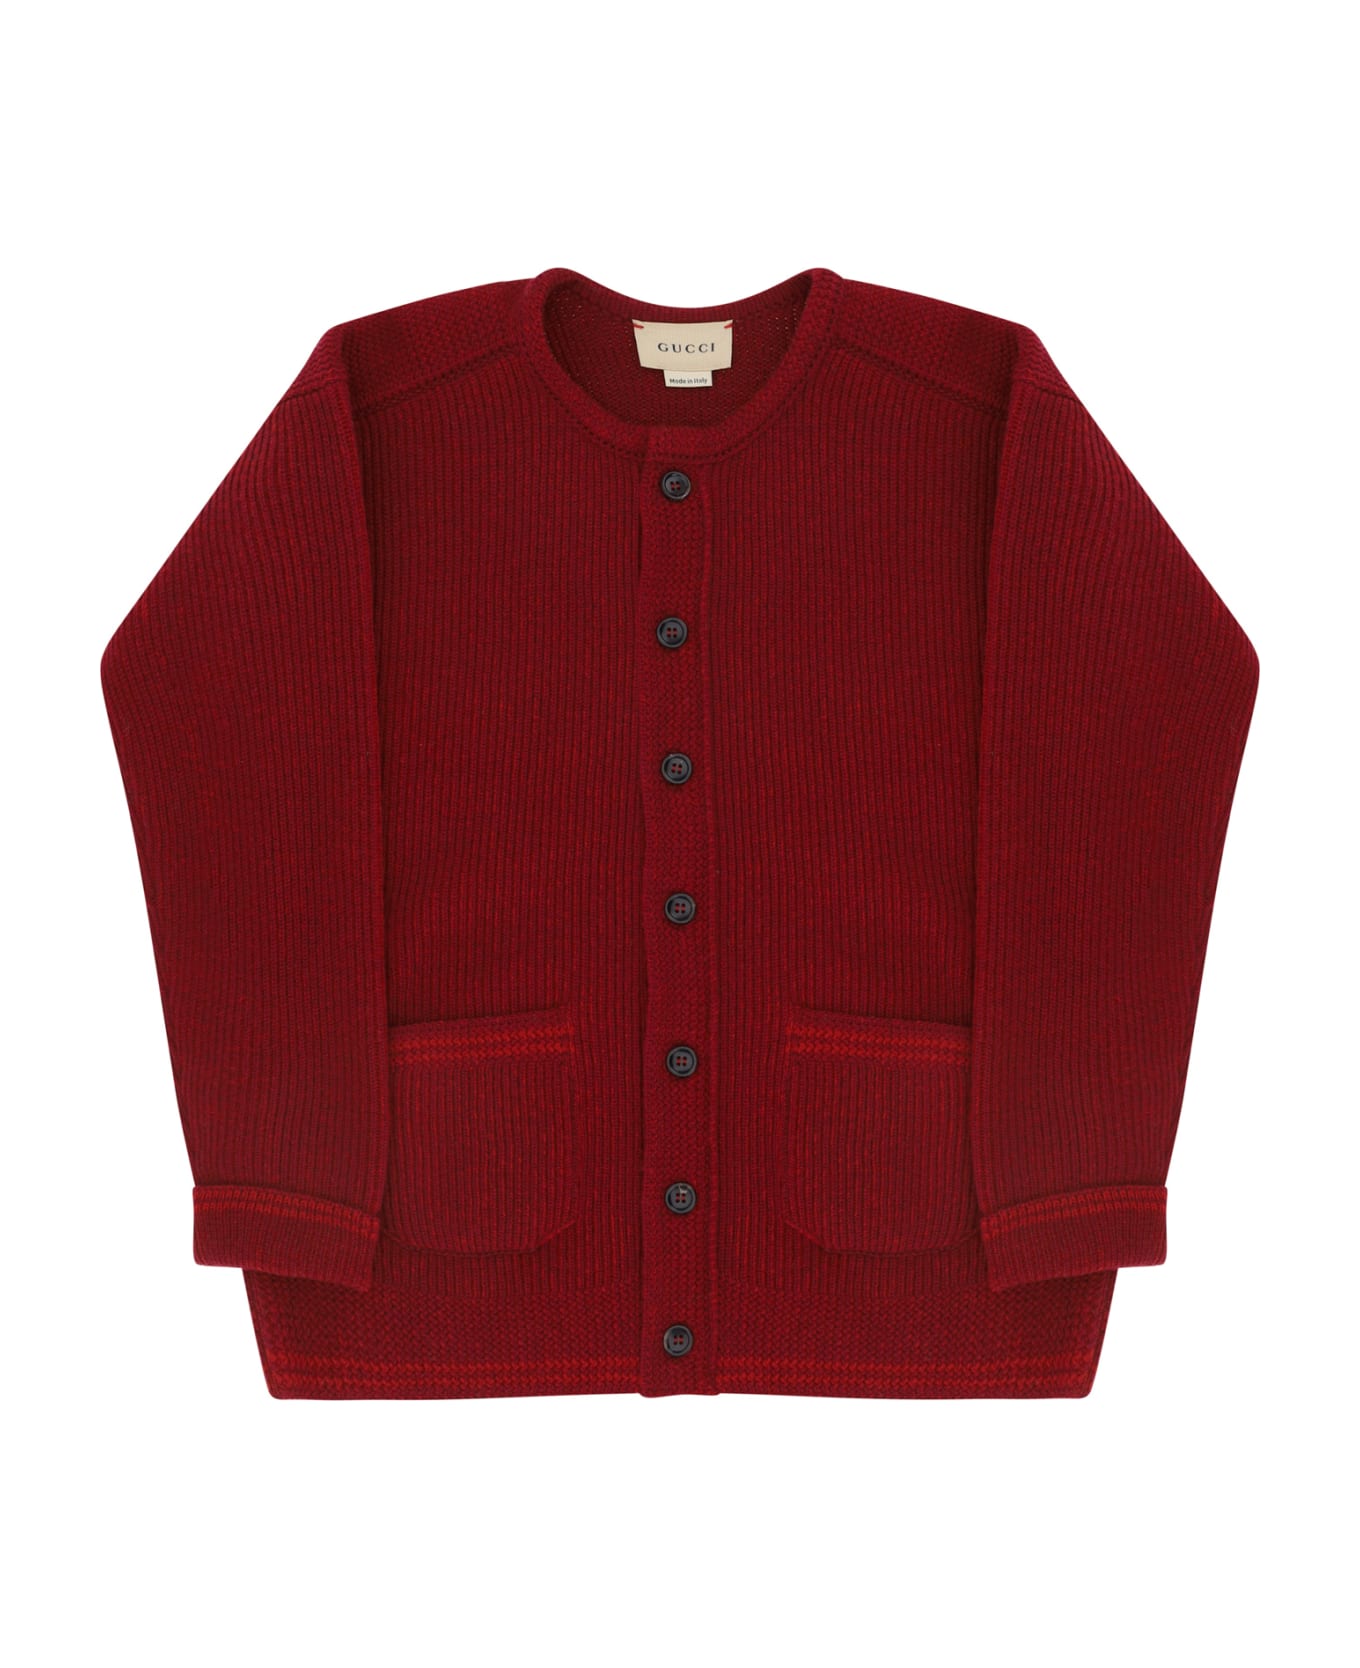 Gucci Sweater For Boy - Bordeaux/red